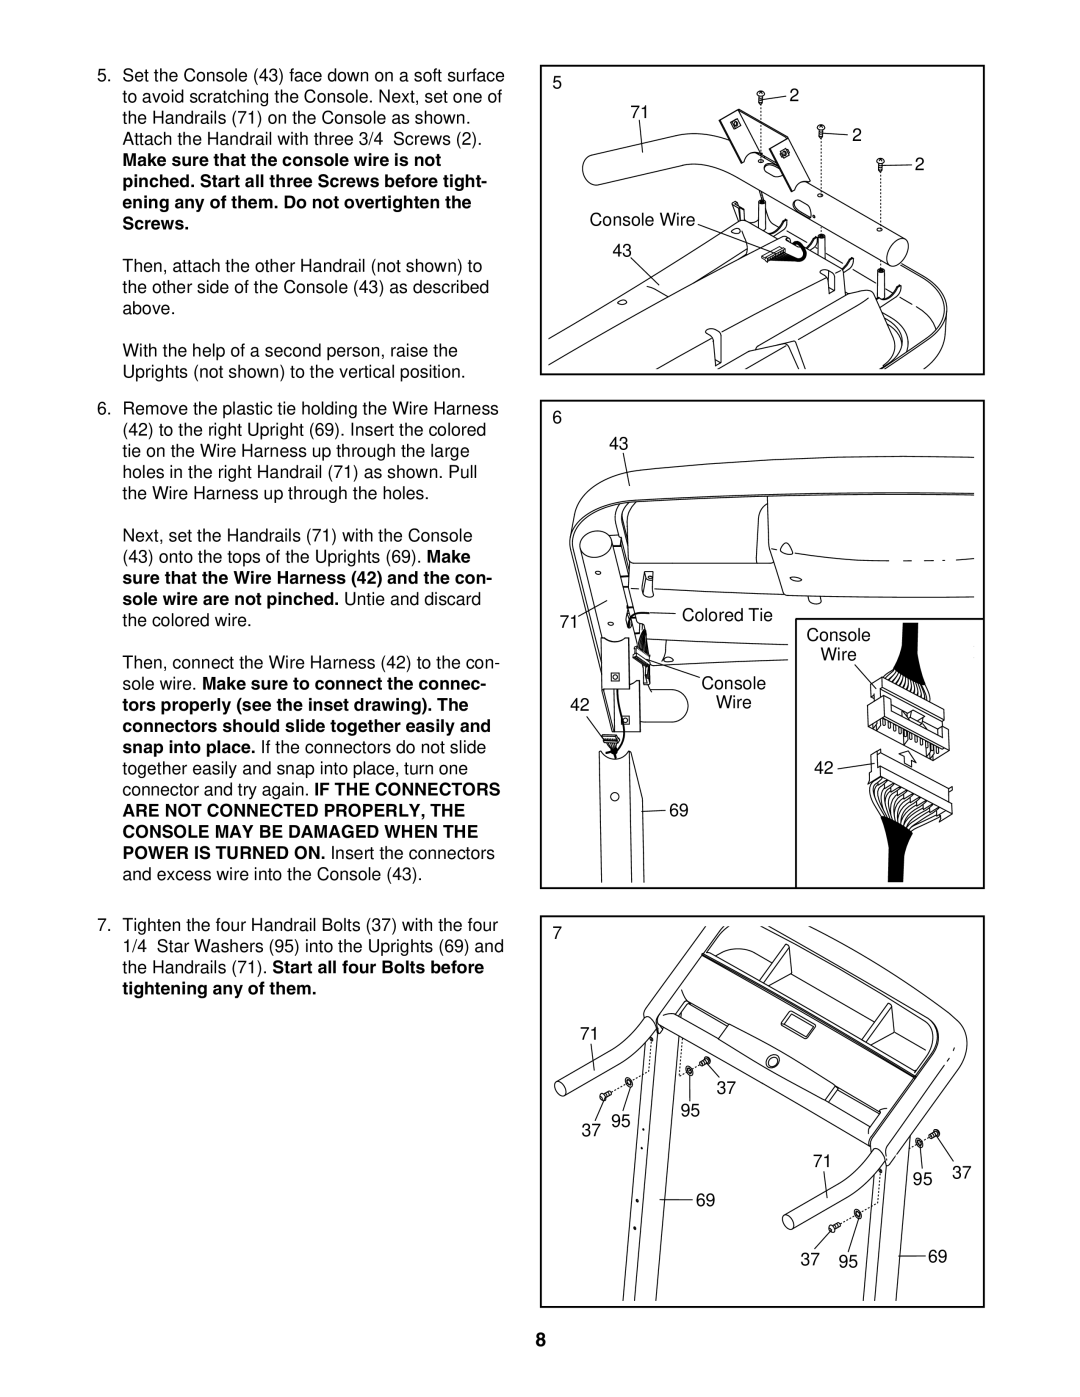 ProForm 831.24623.0 user manual Screws, Sole wire. Make sure to connect the connec, Tors properly see the inset drawing 